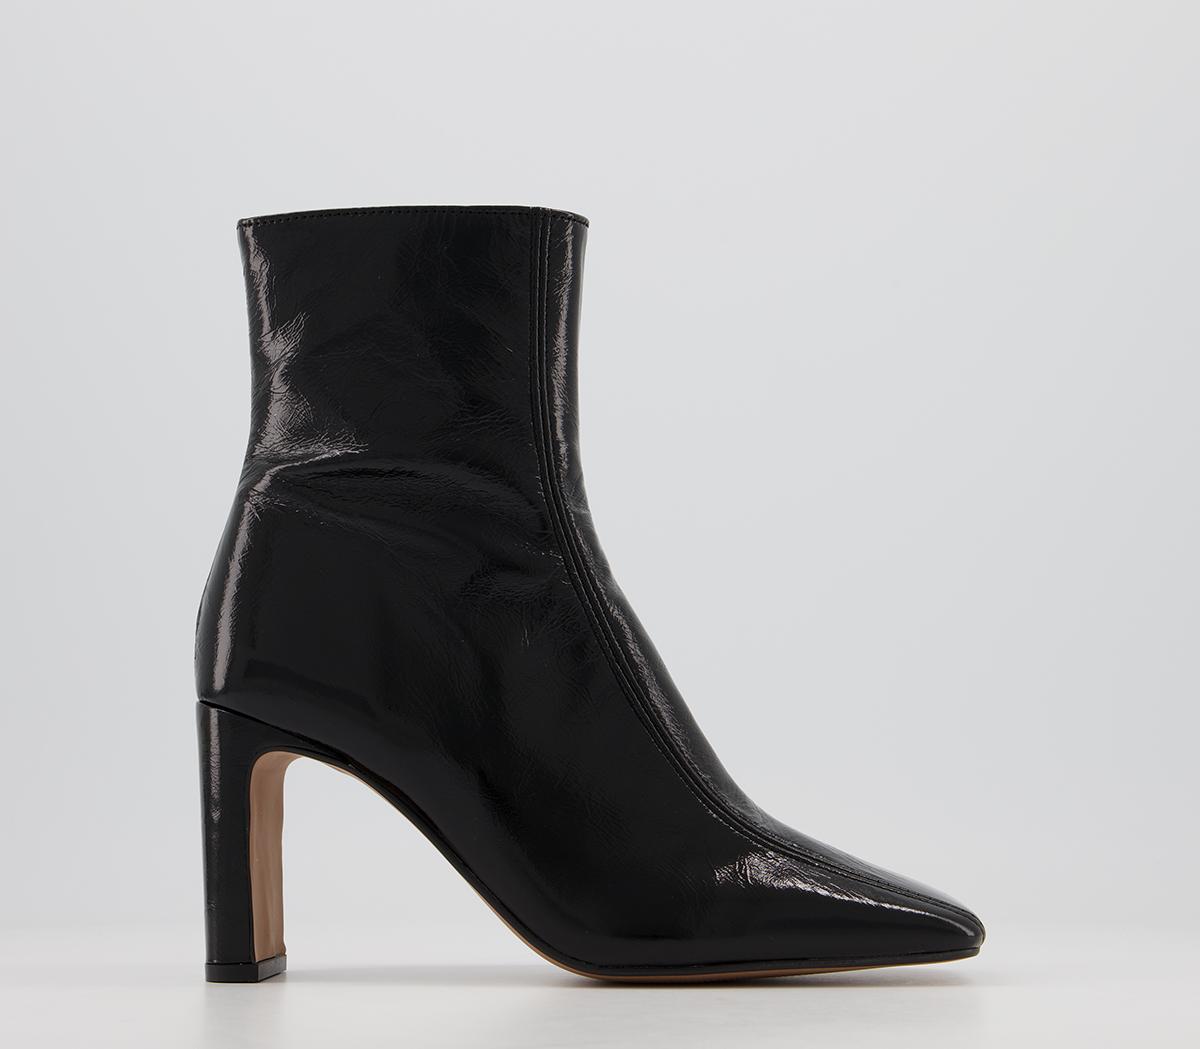 Office Alba Square Toe Formal Ankle Boots Black Shiny Leather - Ankle Boots